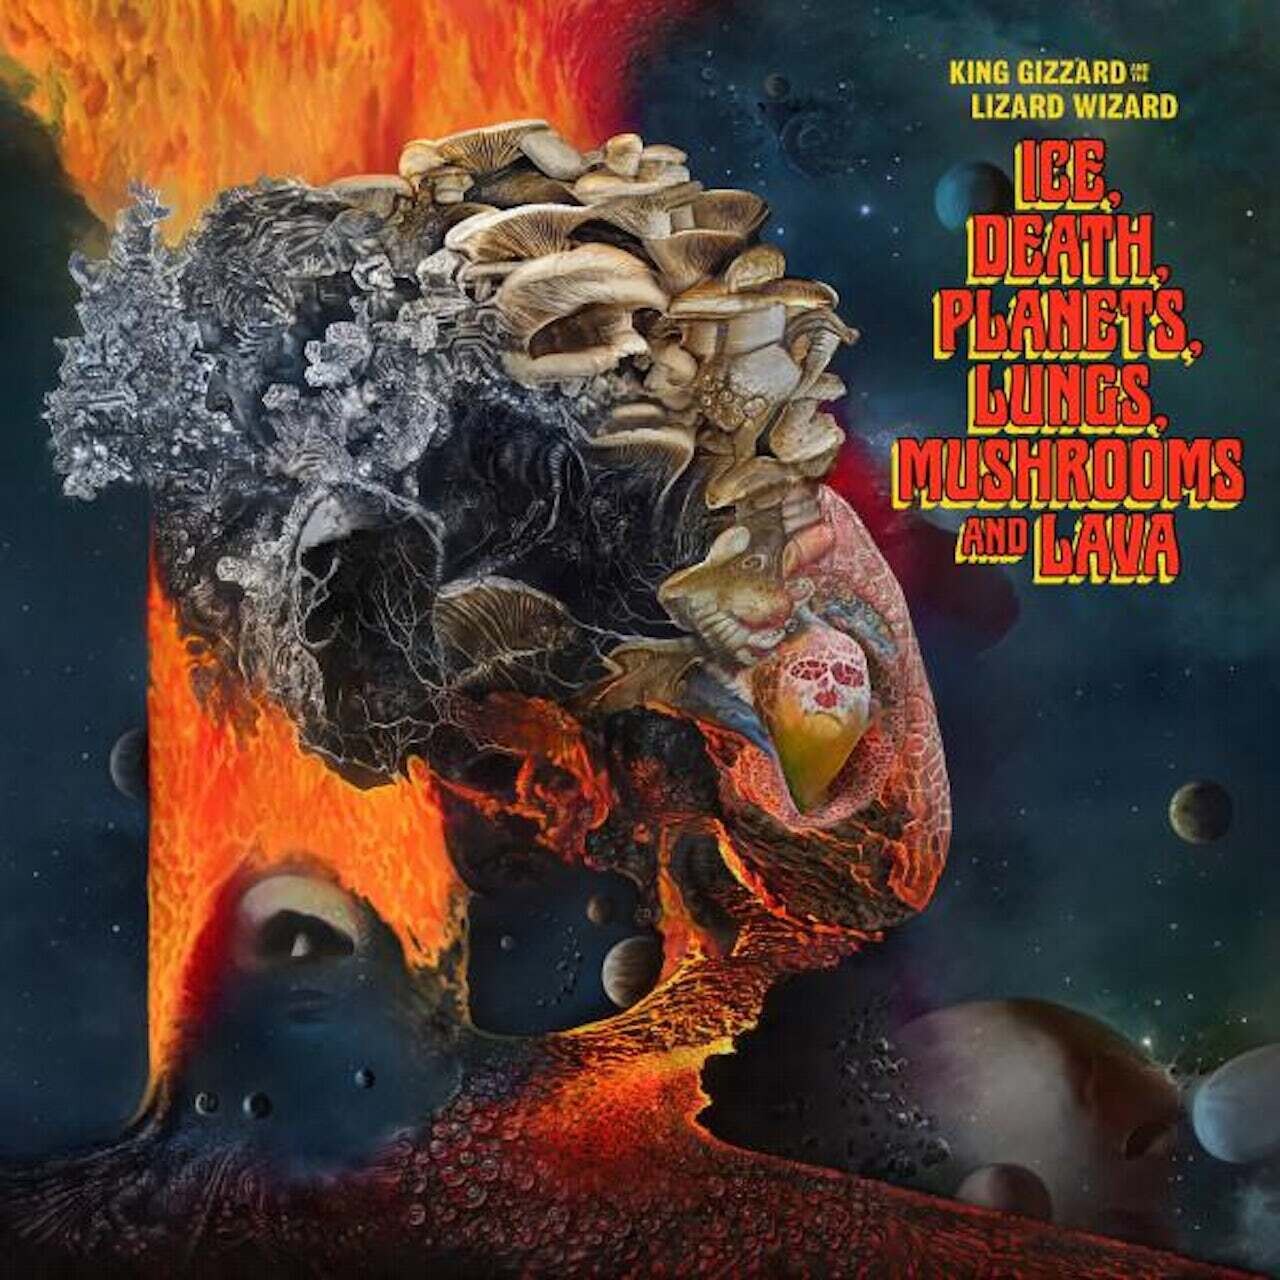 King Gizzard / Ice, Death, Planets, Lungs, Mushrooms and Lava